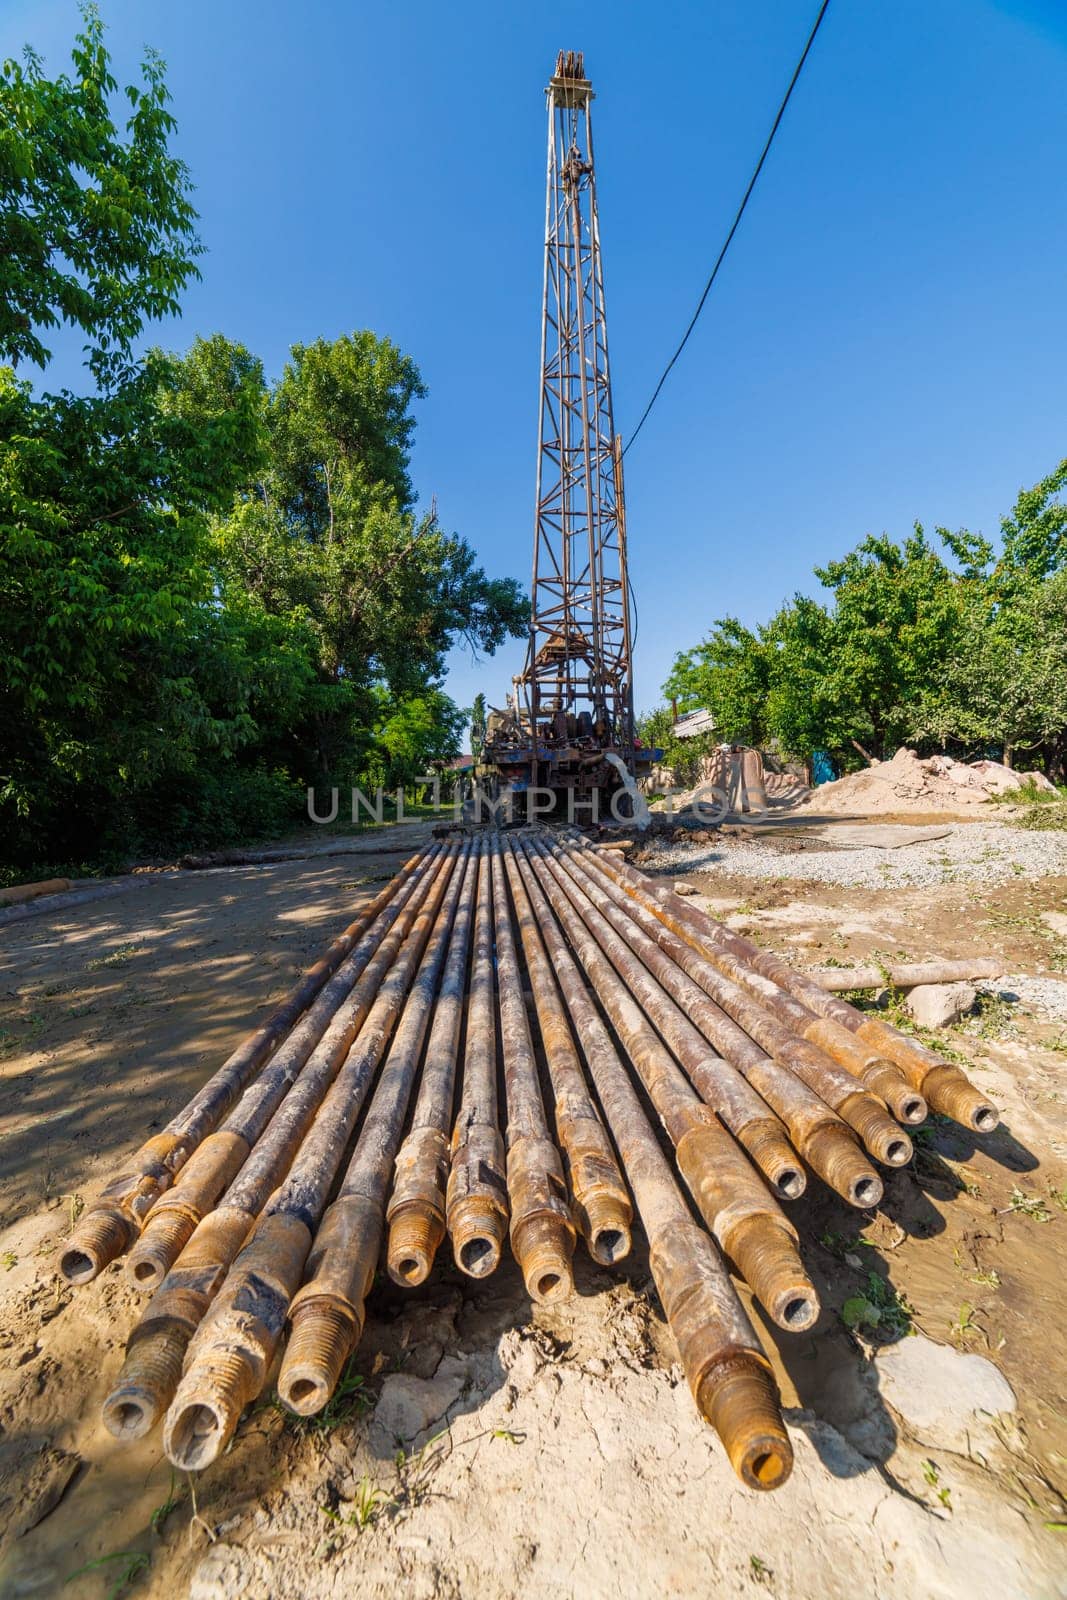 extension drilling rods in front of old water pump truck extracts water from a hole in the ground at sunny summer day, surrounded by a natural landscape with trees, plants, and soil. Ultra-wide angle.